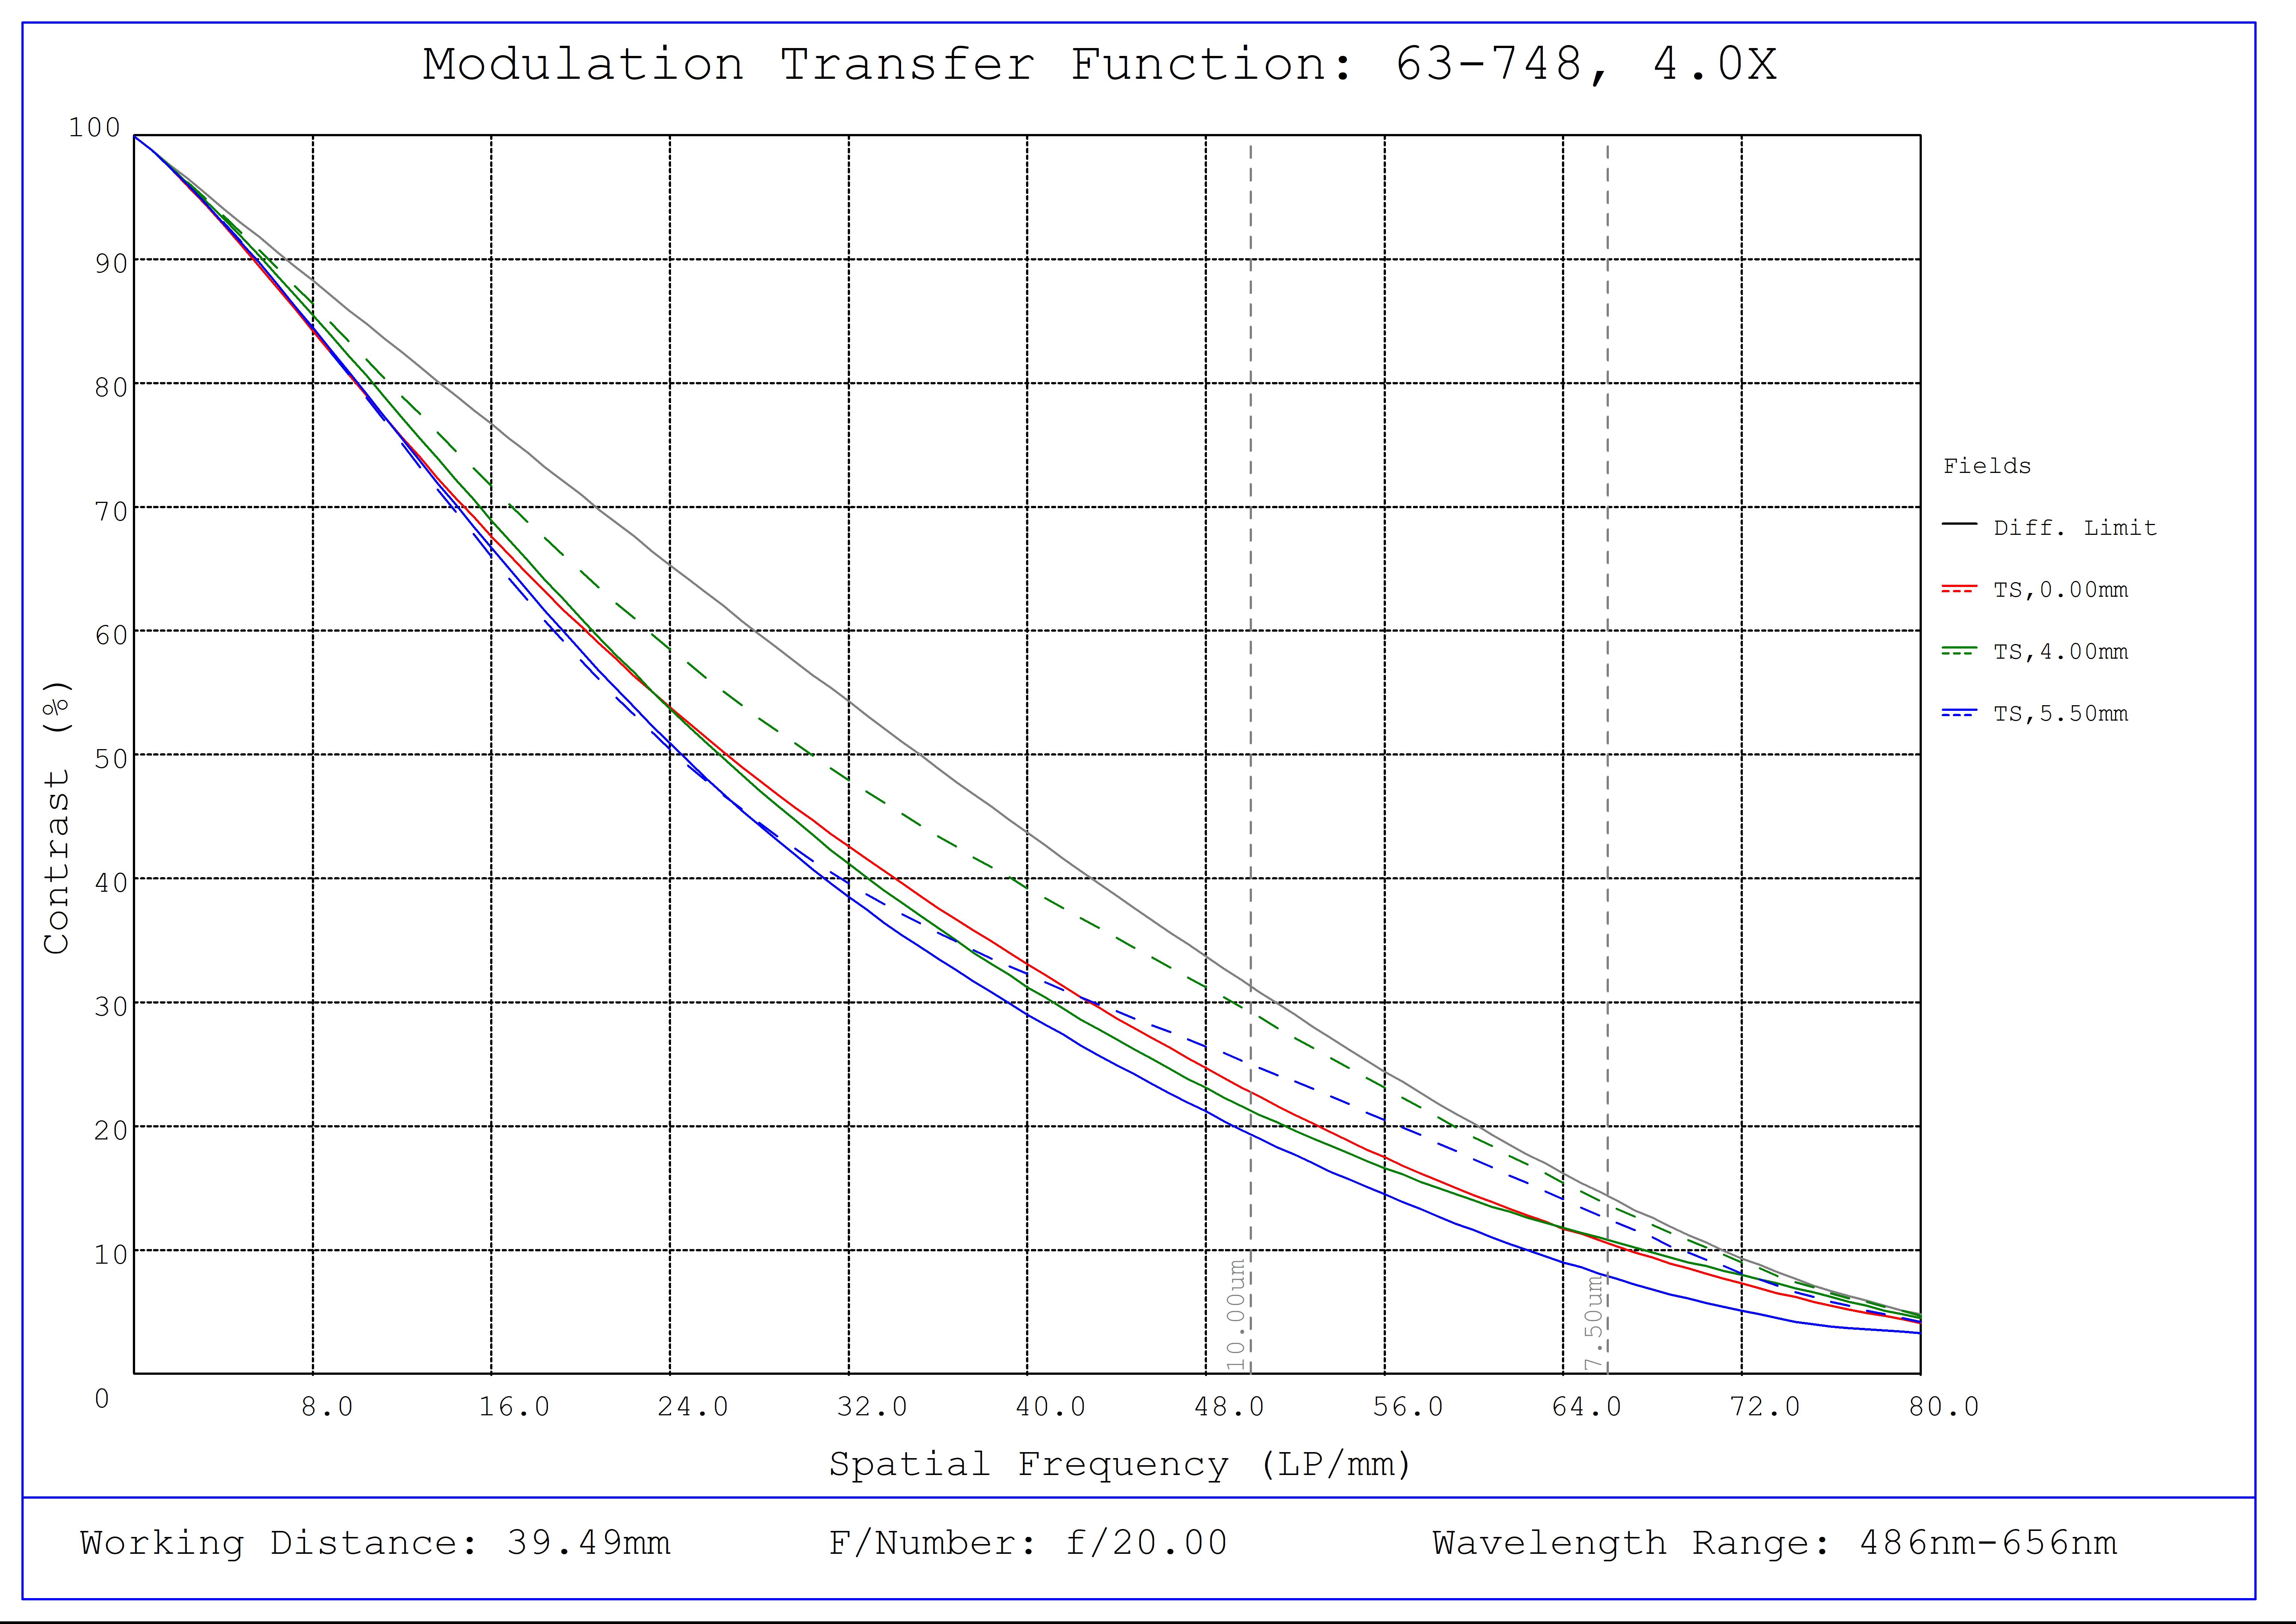 #63-748, 4X, 40mm WD CompactTL™ Telecentric Lens, Modulated Transfer Function (MTF) Plot, 39mm Working Distance, f20